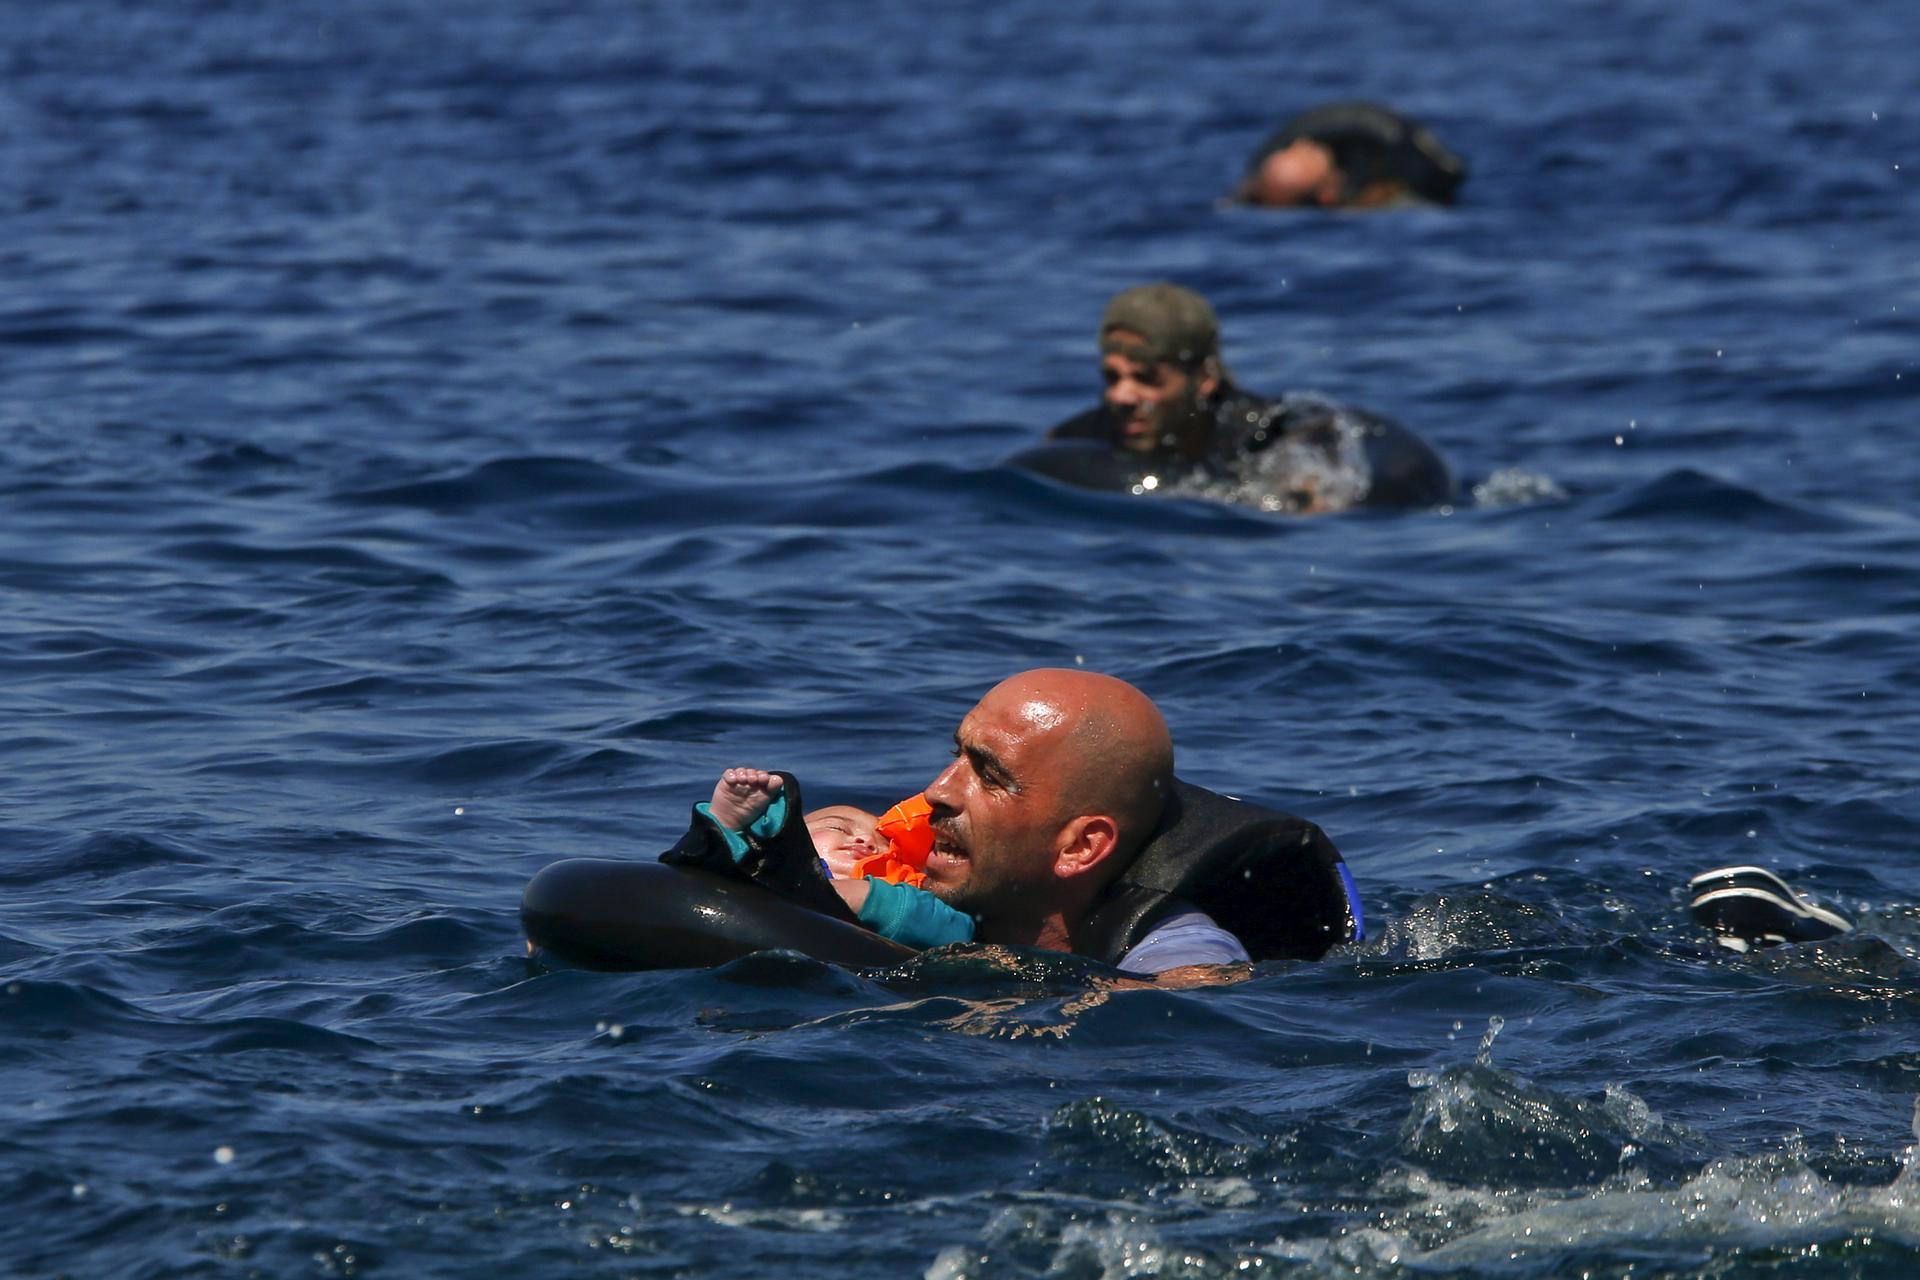 A Syrian refugee holding a baby in a life tube swims towards the shore, after their dinghy deflated some 100 yards from the Greek island of Lesbos, September 13th 2015. 